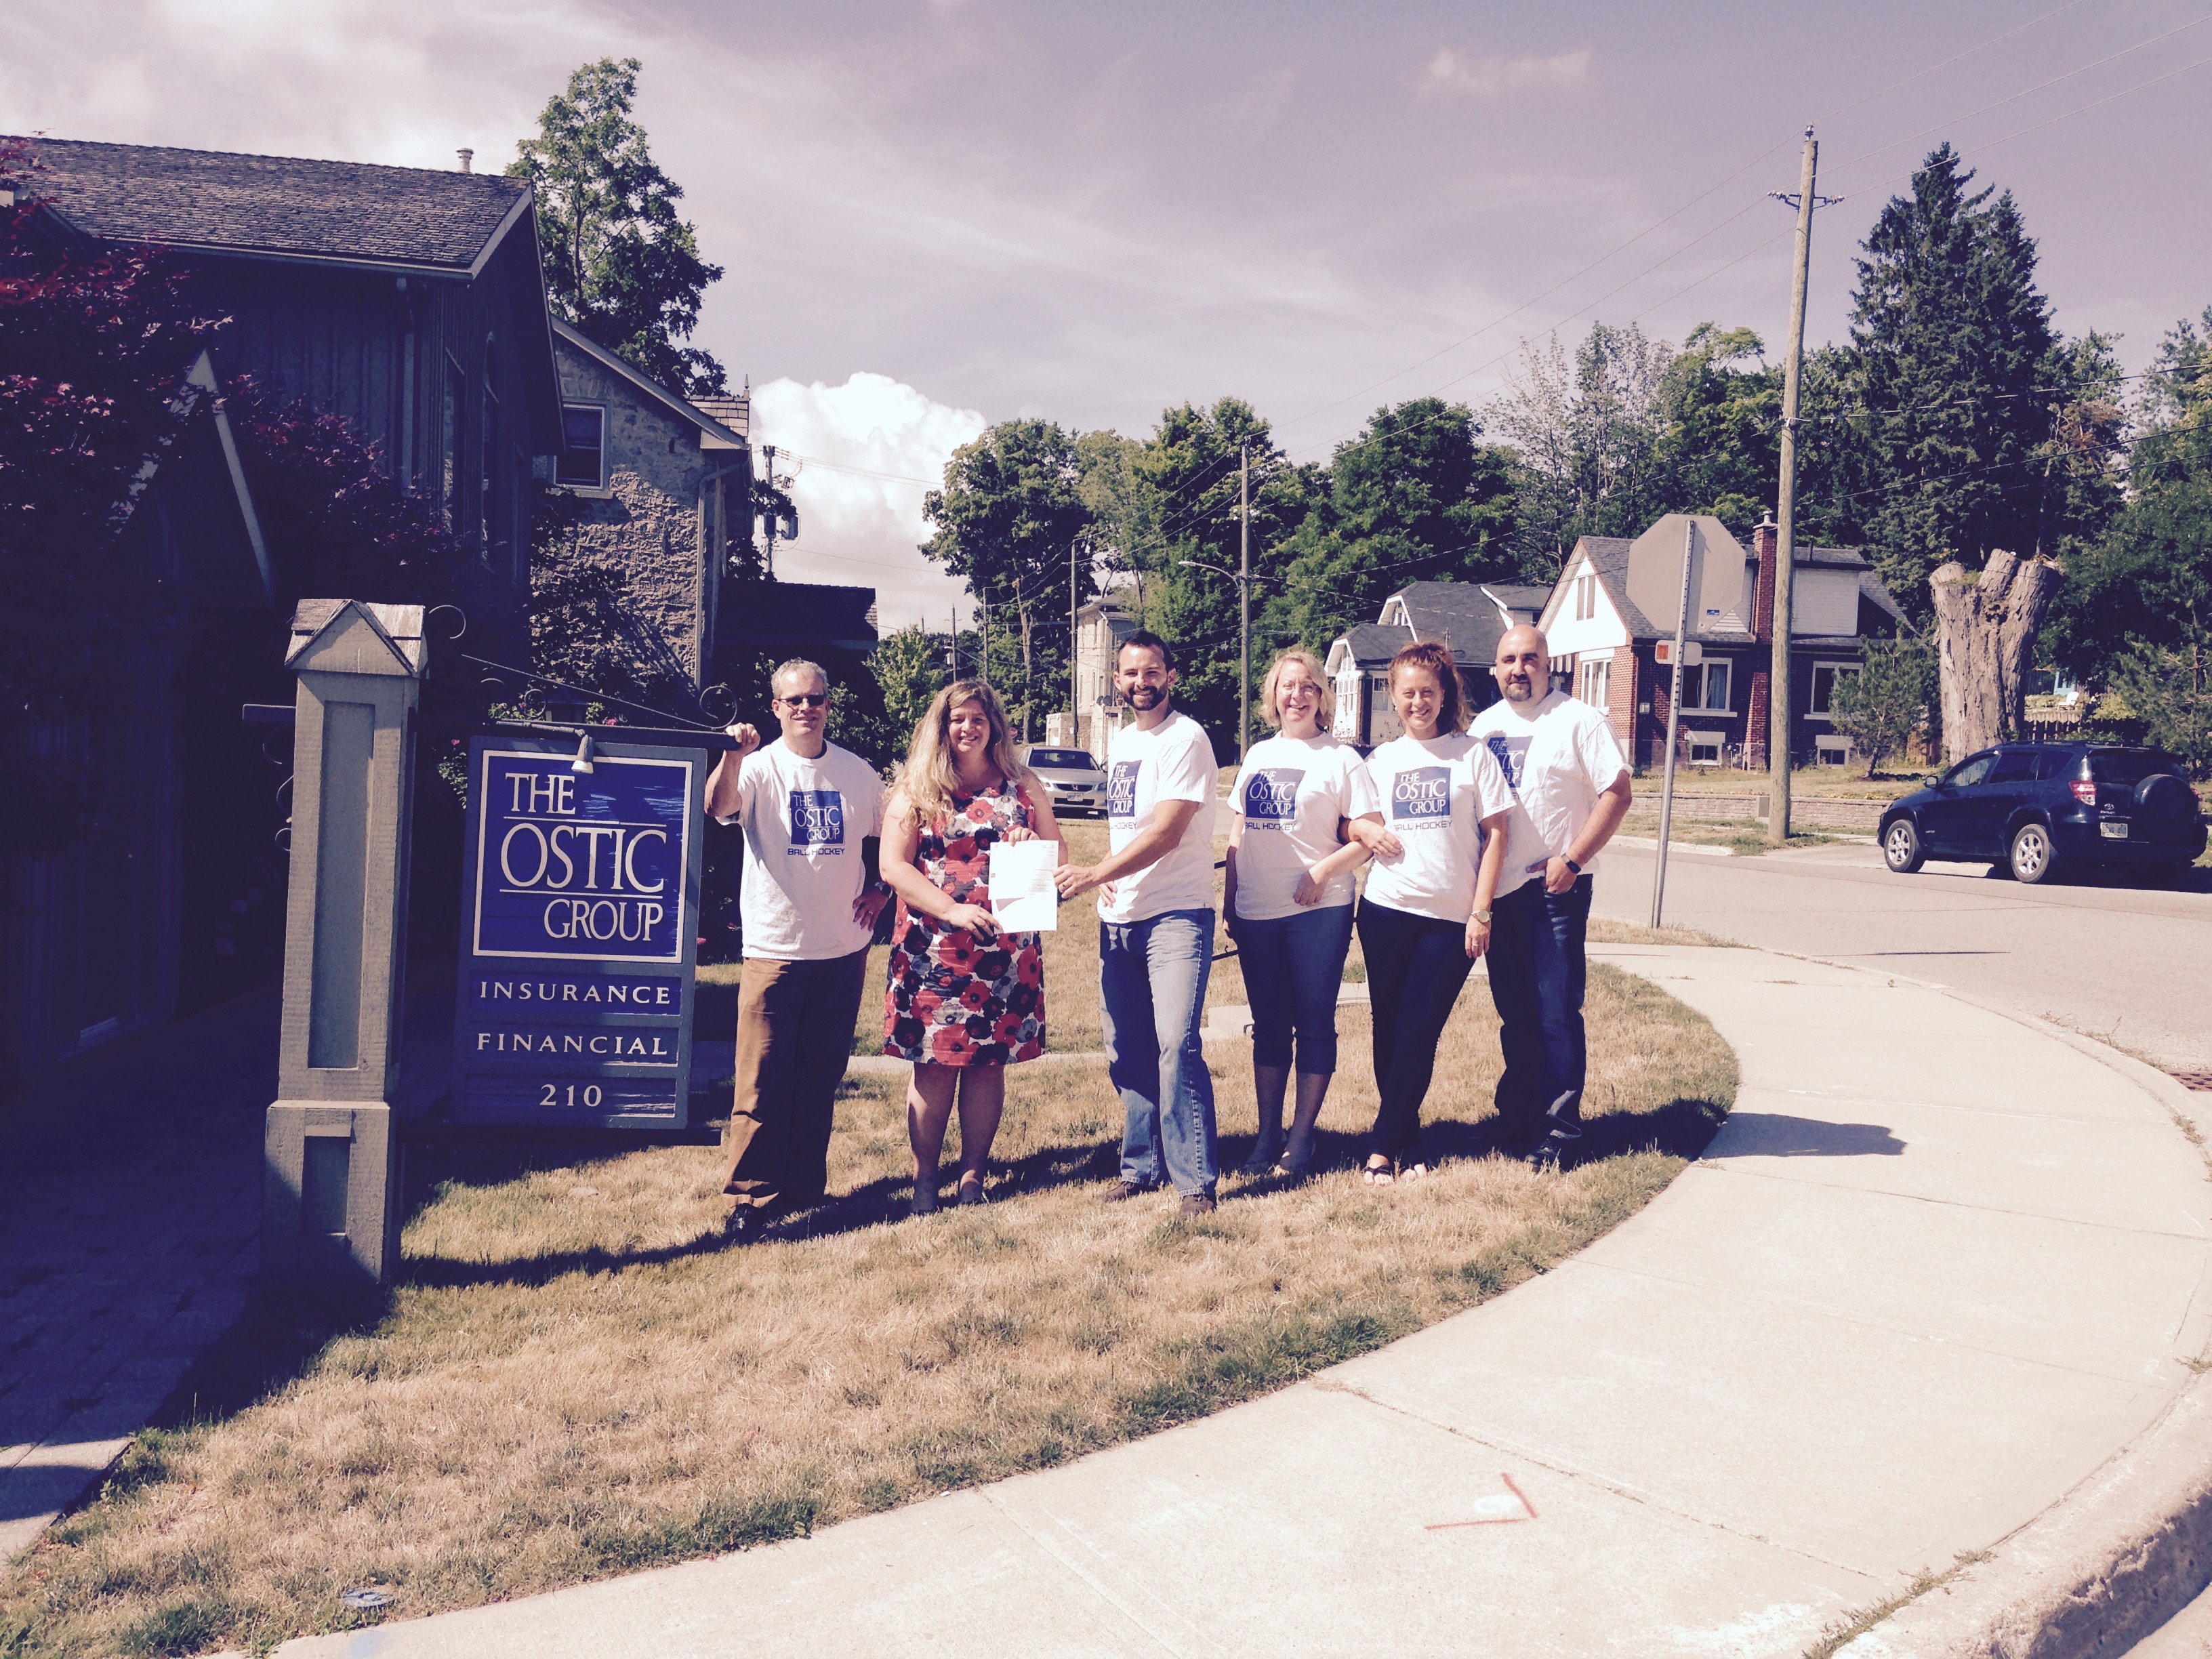 The Ostic Group with Big Brothers Big Sisters in Fergus